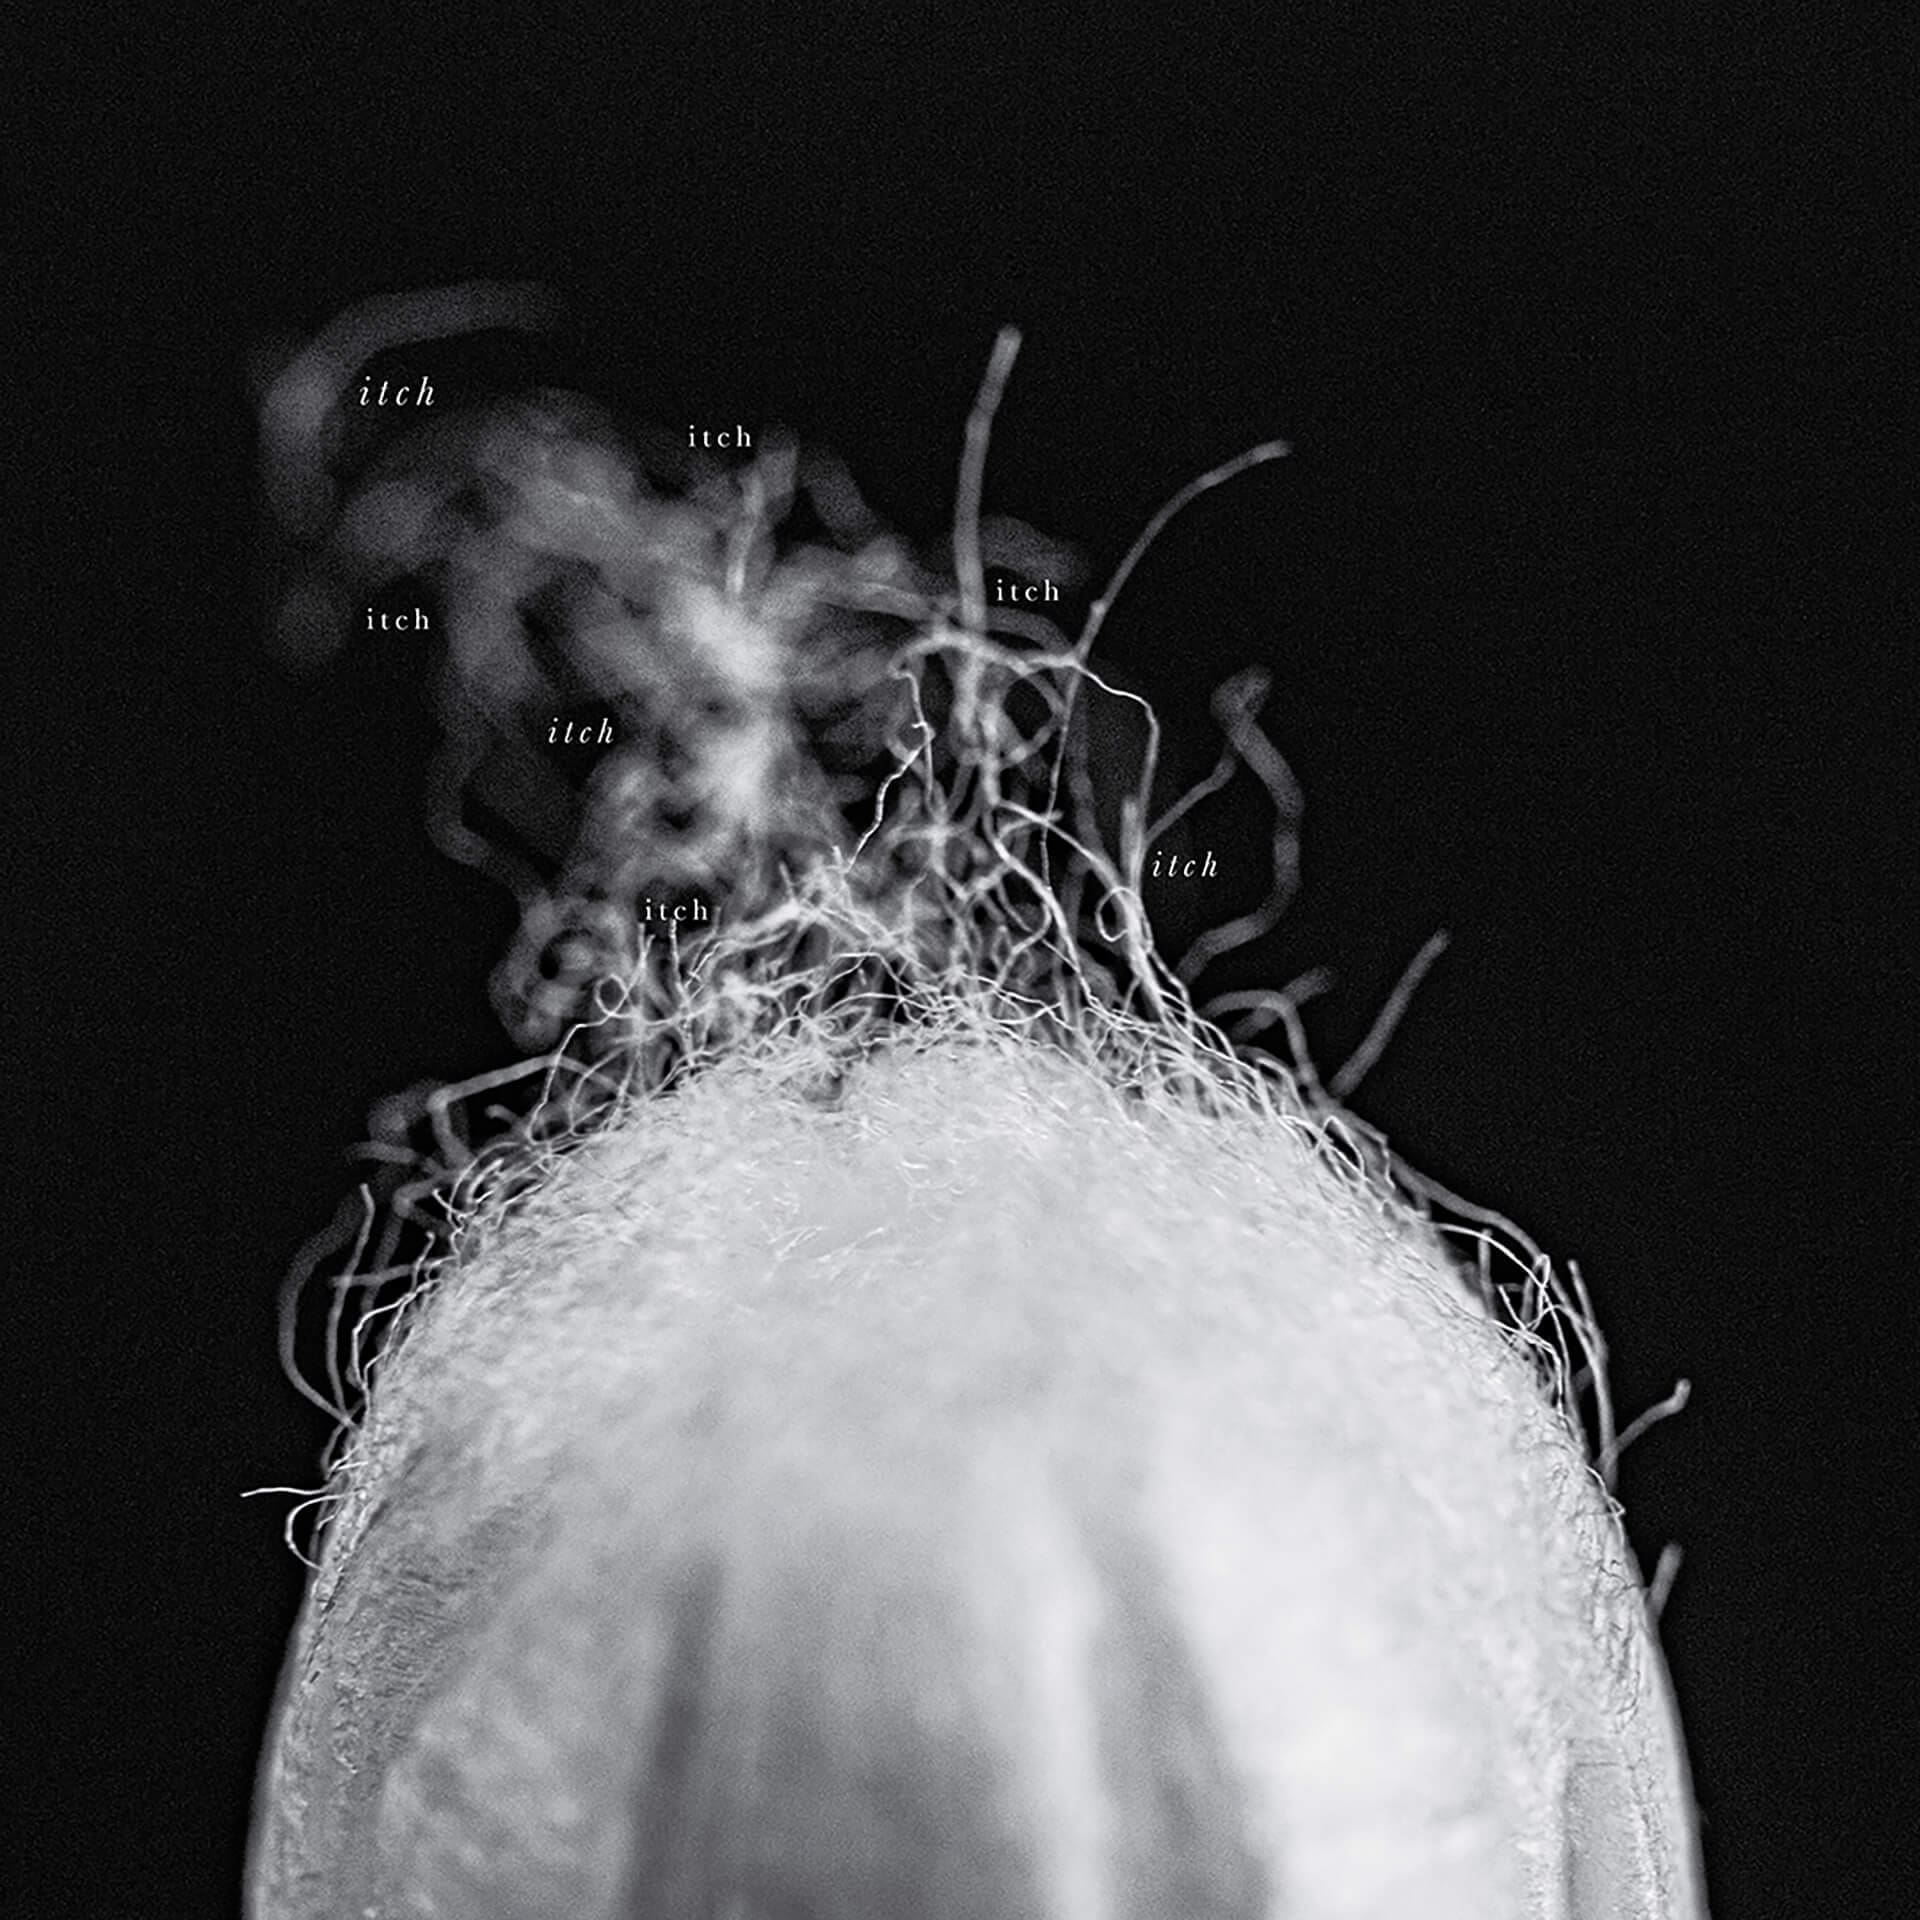 An extreme black and white closeup of the top of a tampon. In between the fibers of cotton is small white text that says "itch".